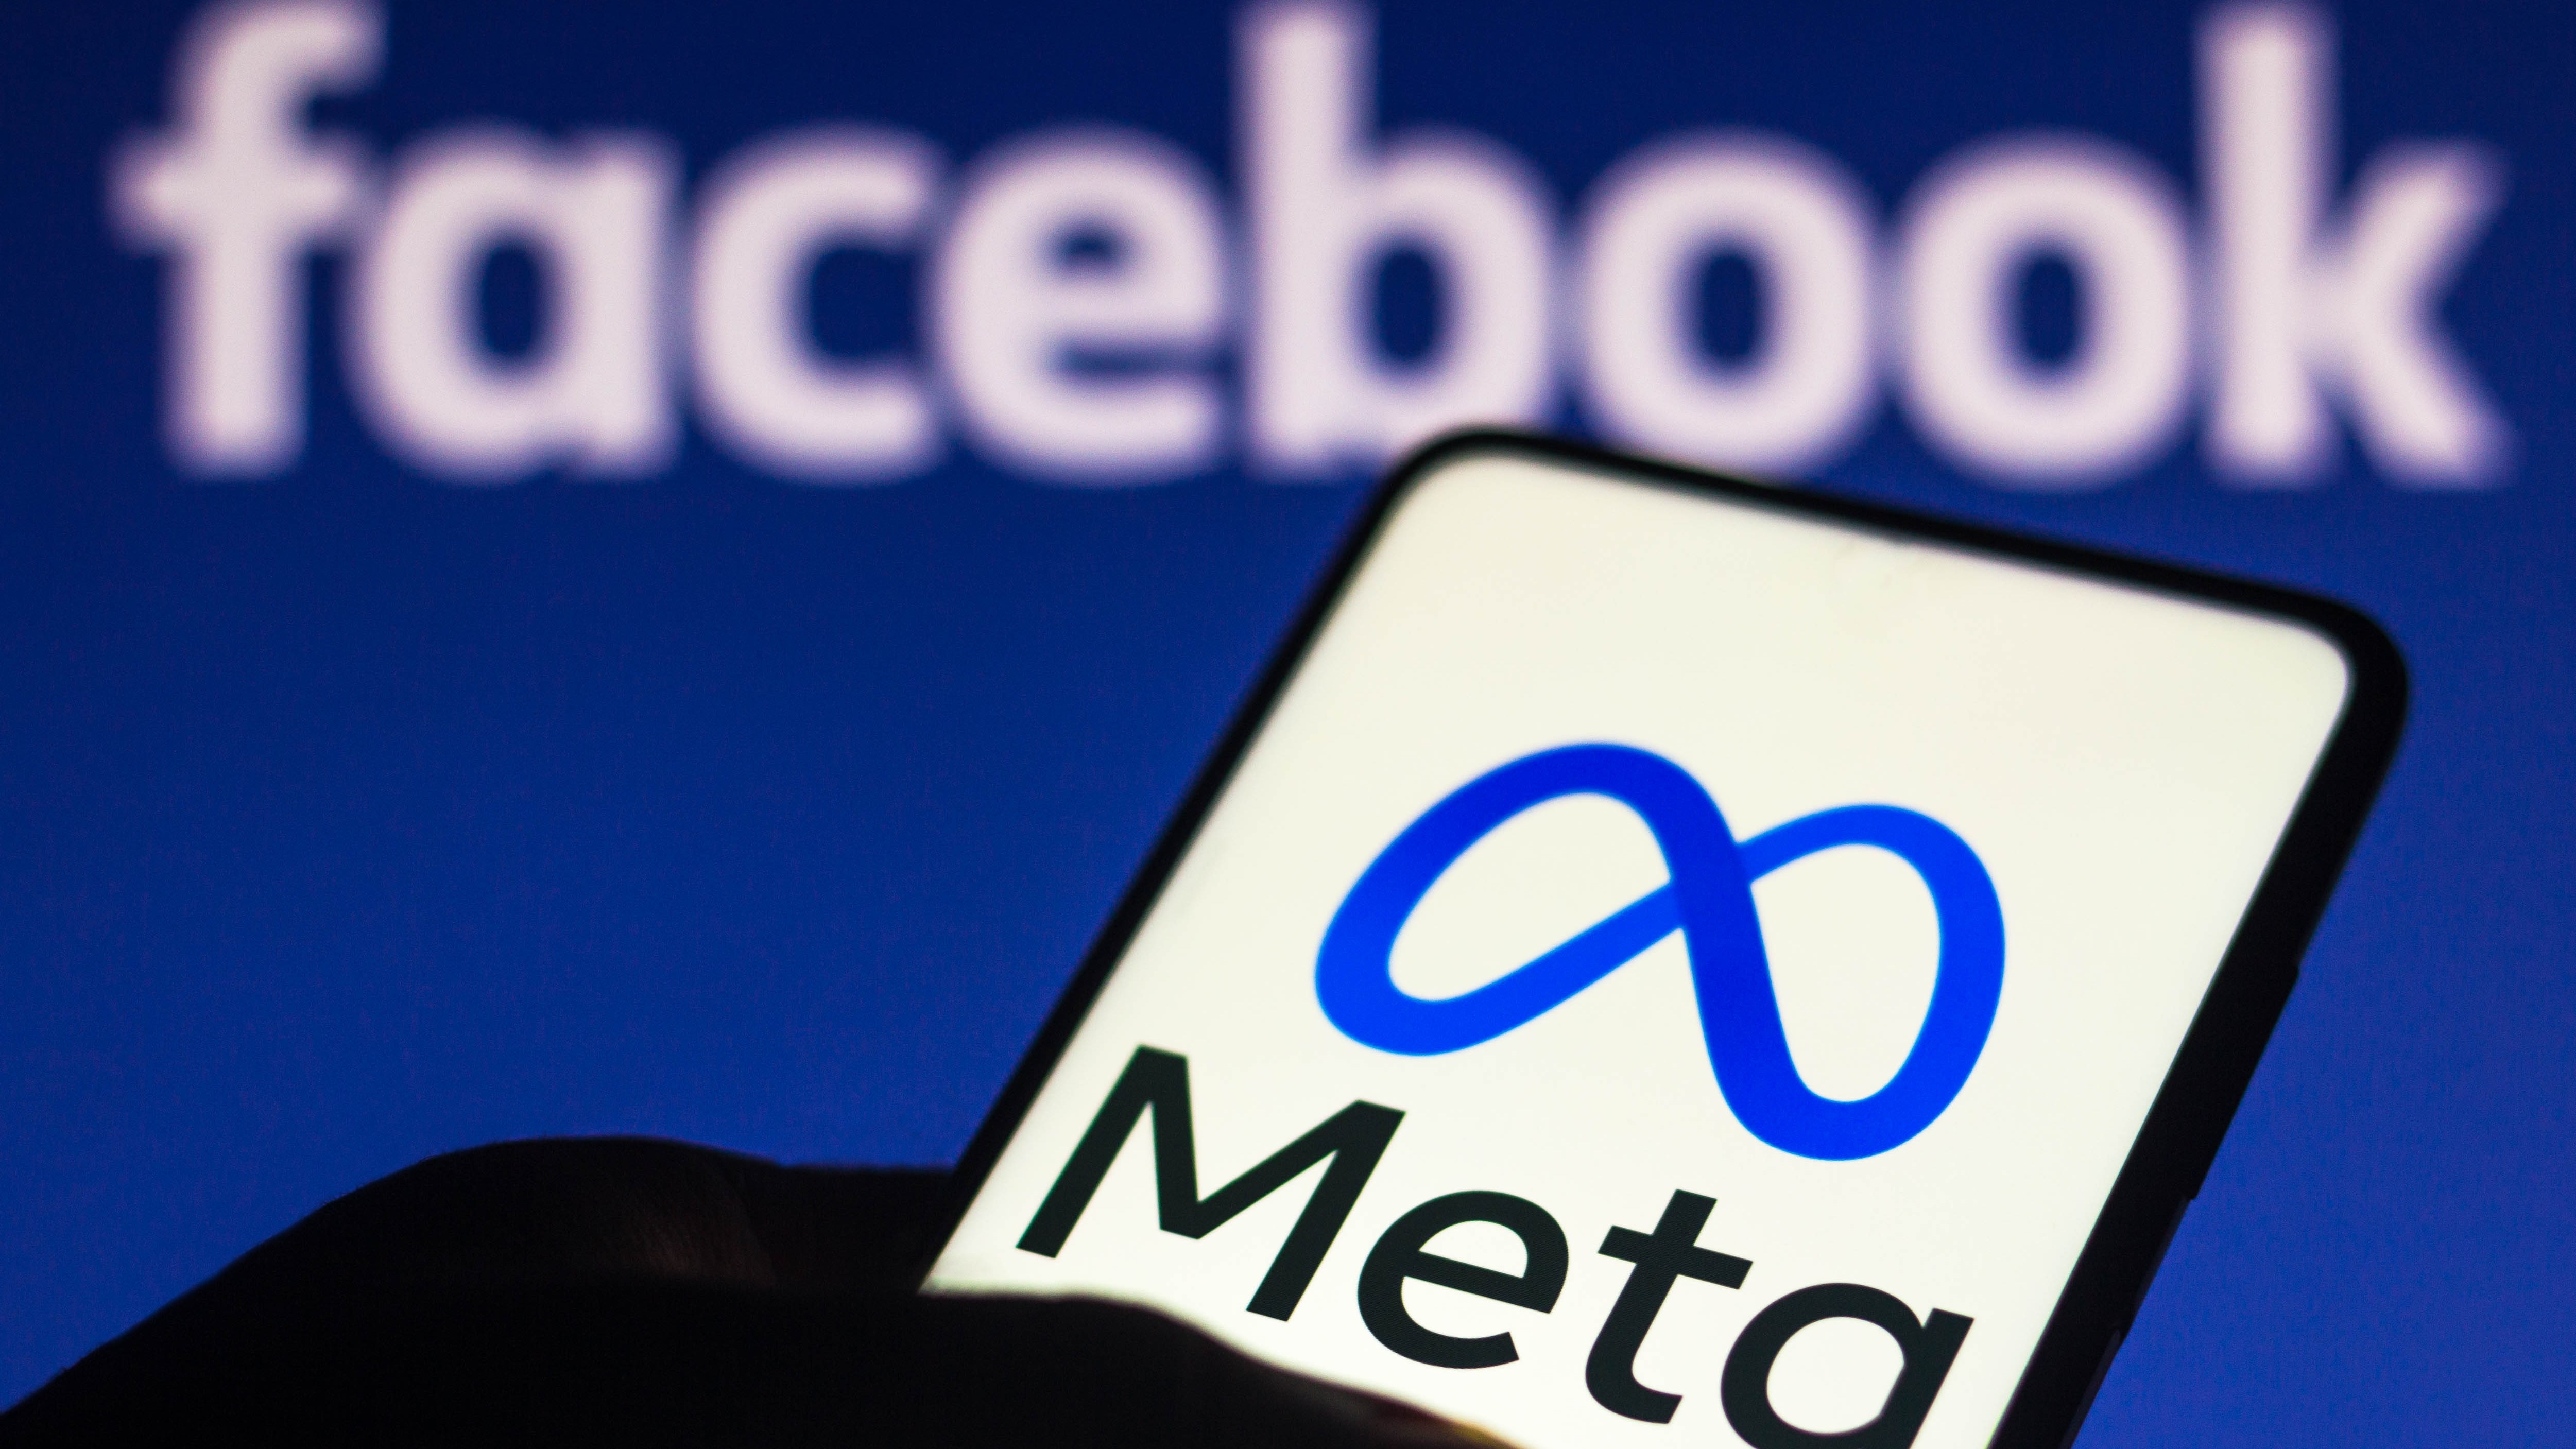 The Meta logo on a smartphone in front of the Facebook logo a little blurred in the background